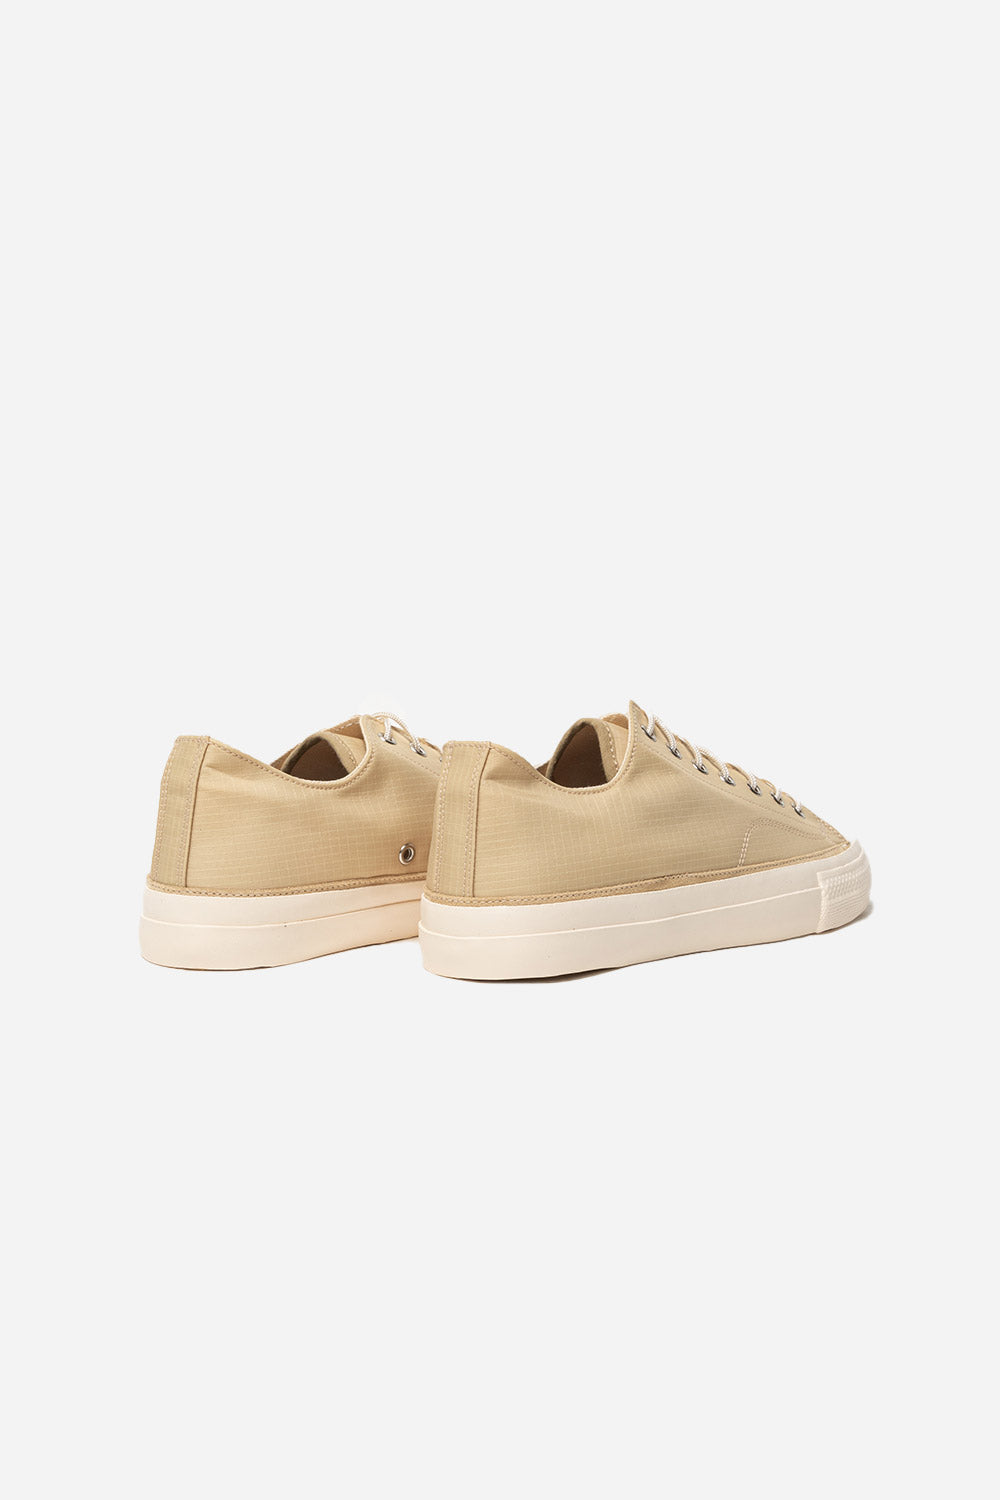 reproduction-of-found-us-military-trainers-beige